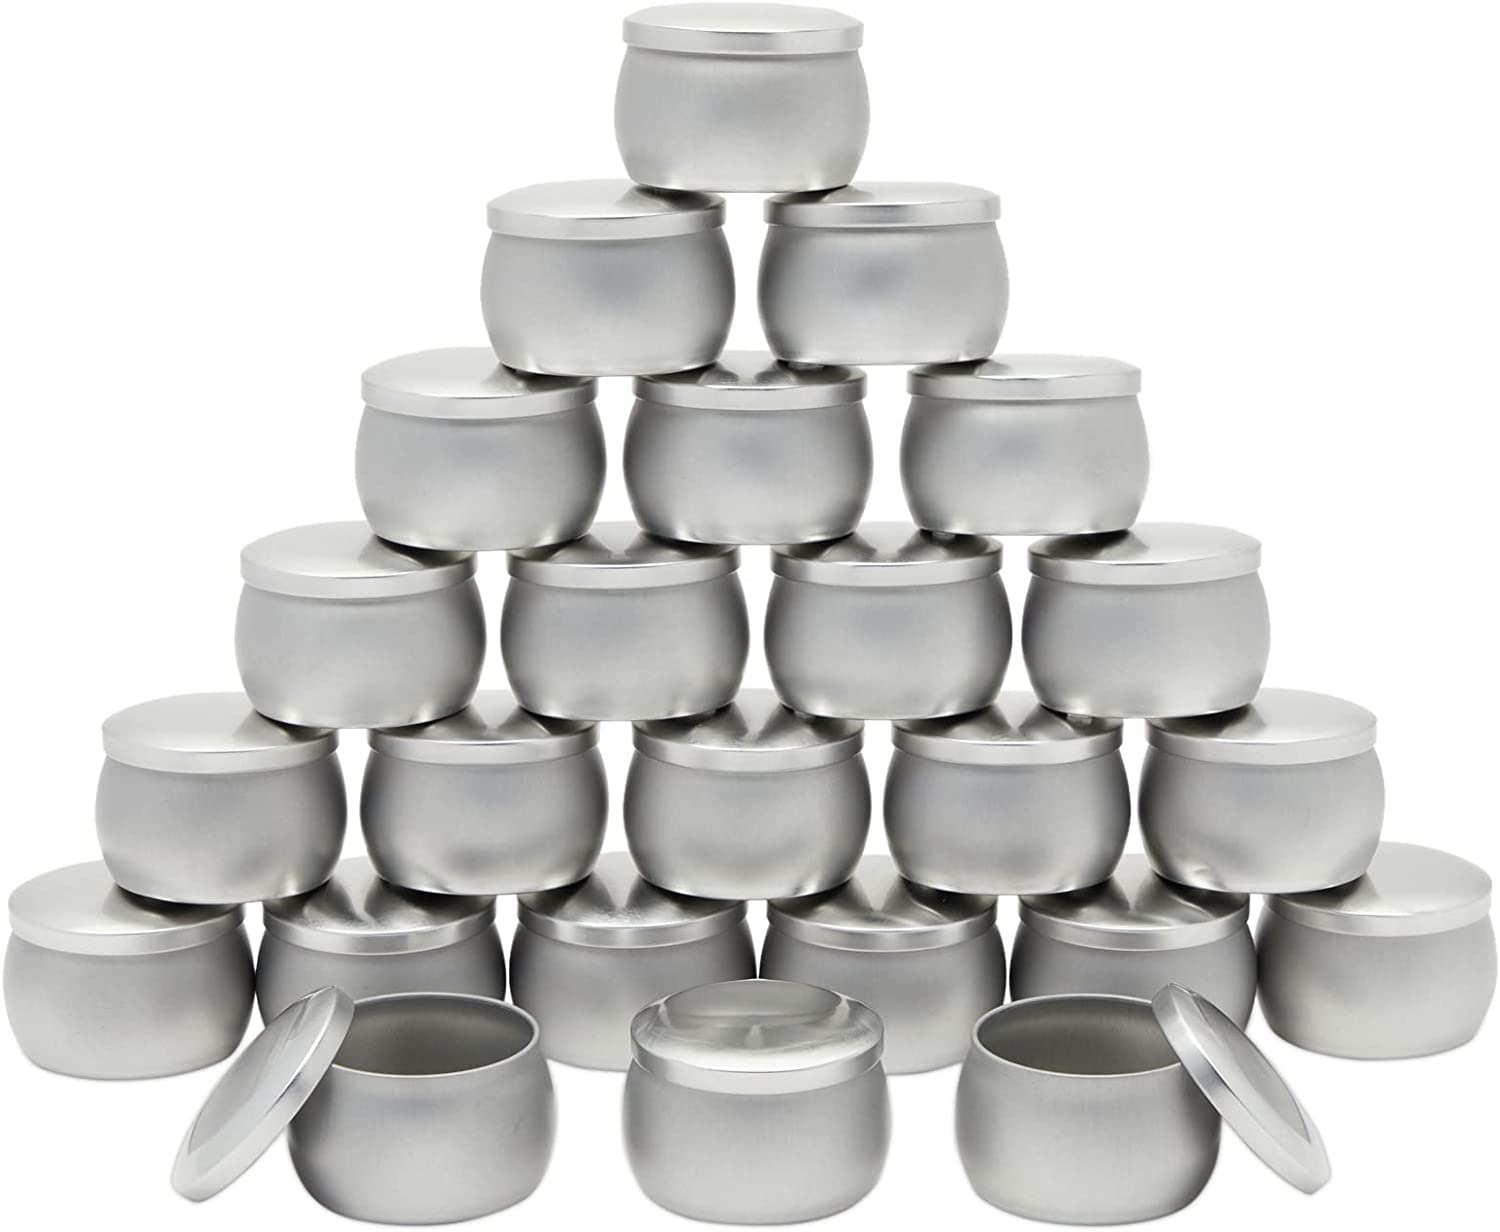 24 Pack Small 4 oz Candle Tins for Making Candles with Lids, Round Containers for DIY Crafts (Silver, 3 x 2 in)